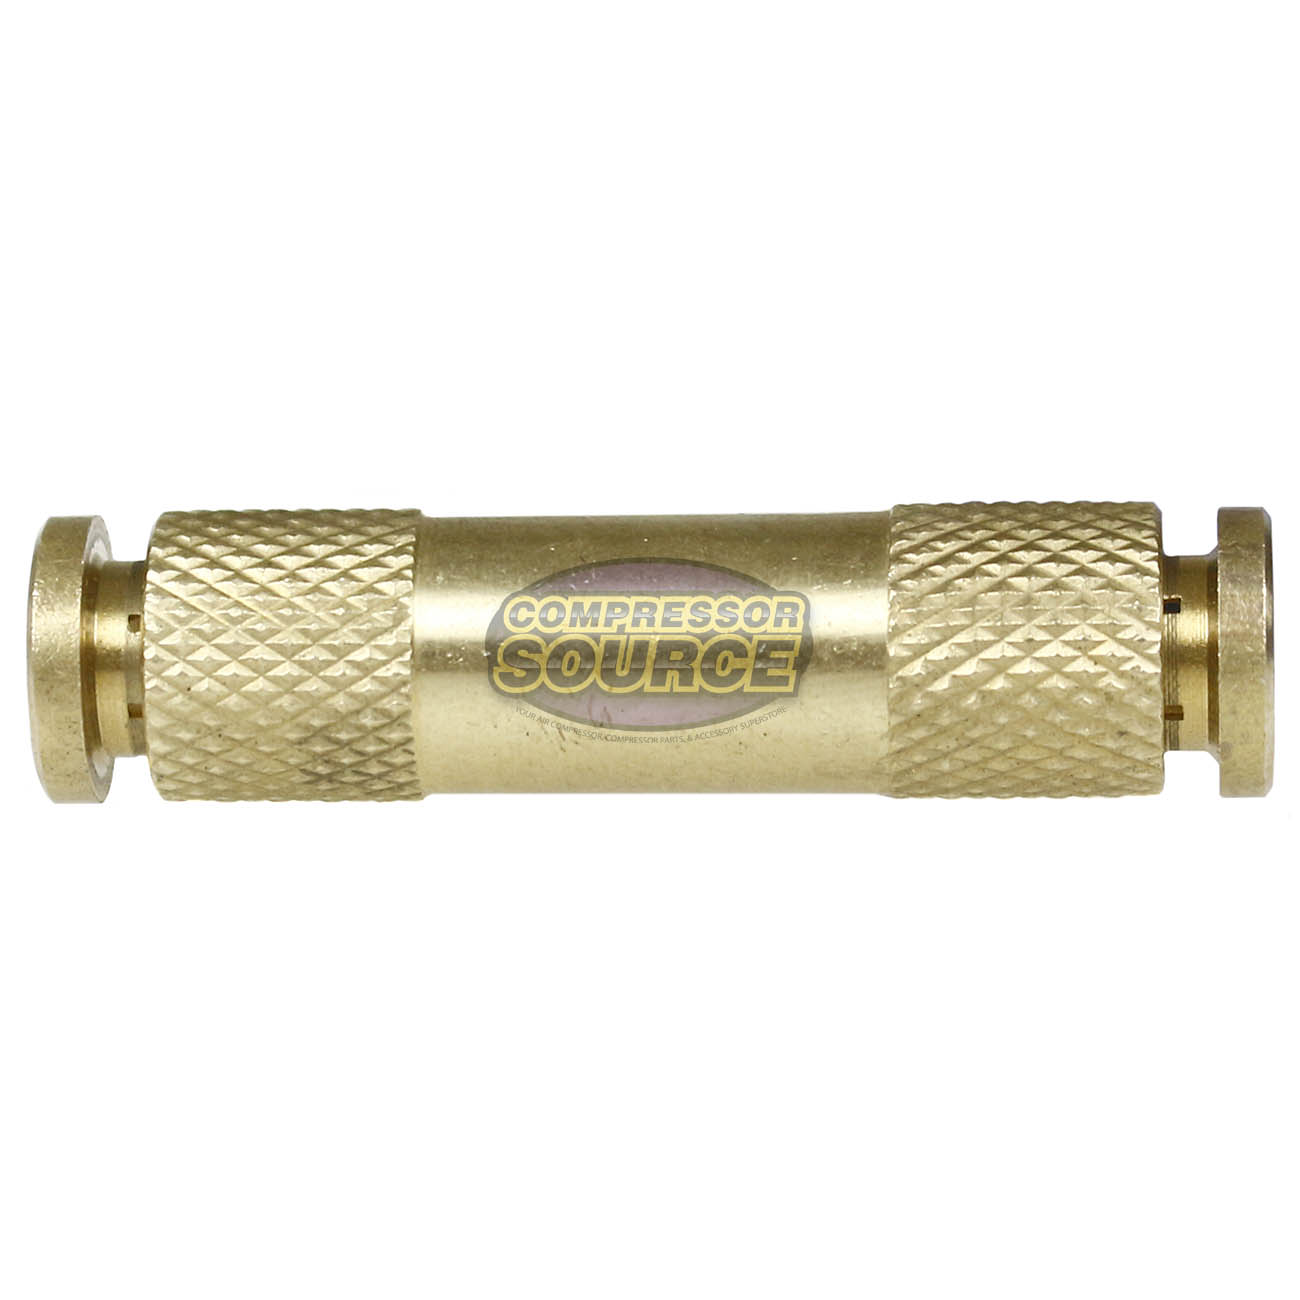 1/4" Brass Push Lock Union Connector Quick Push-In Connect and Disconnect PP62C